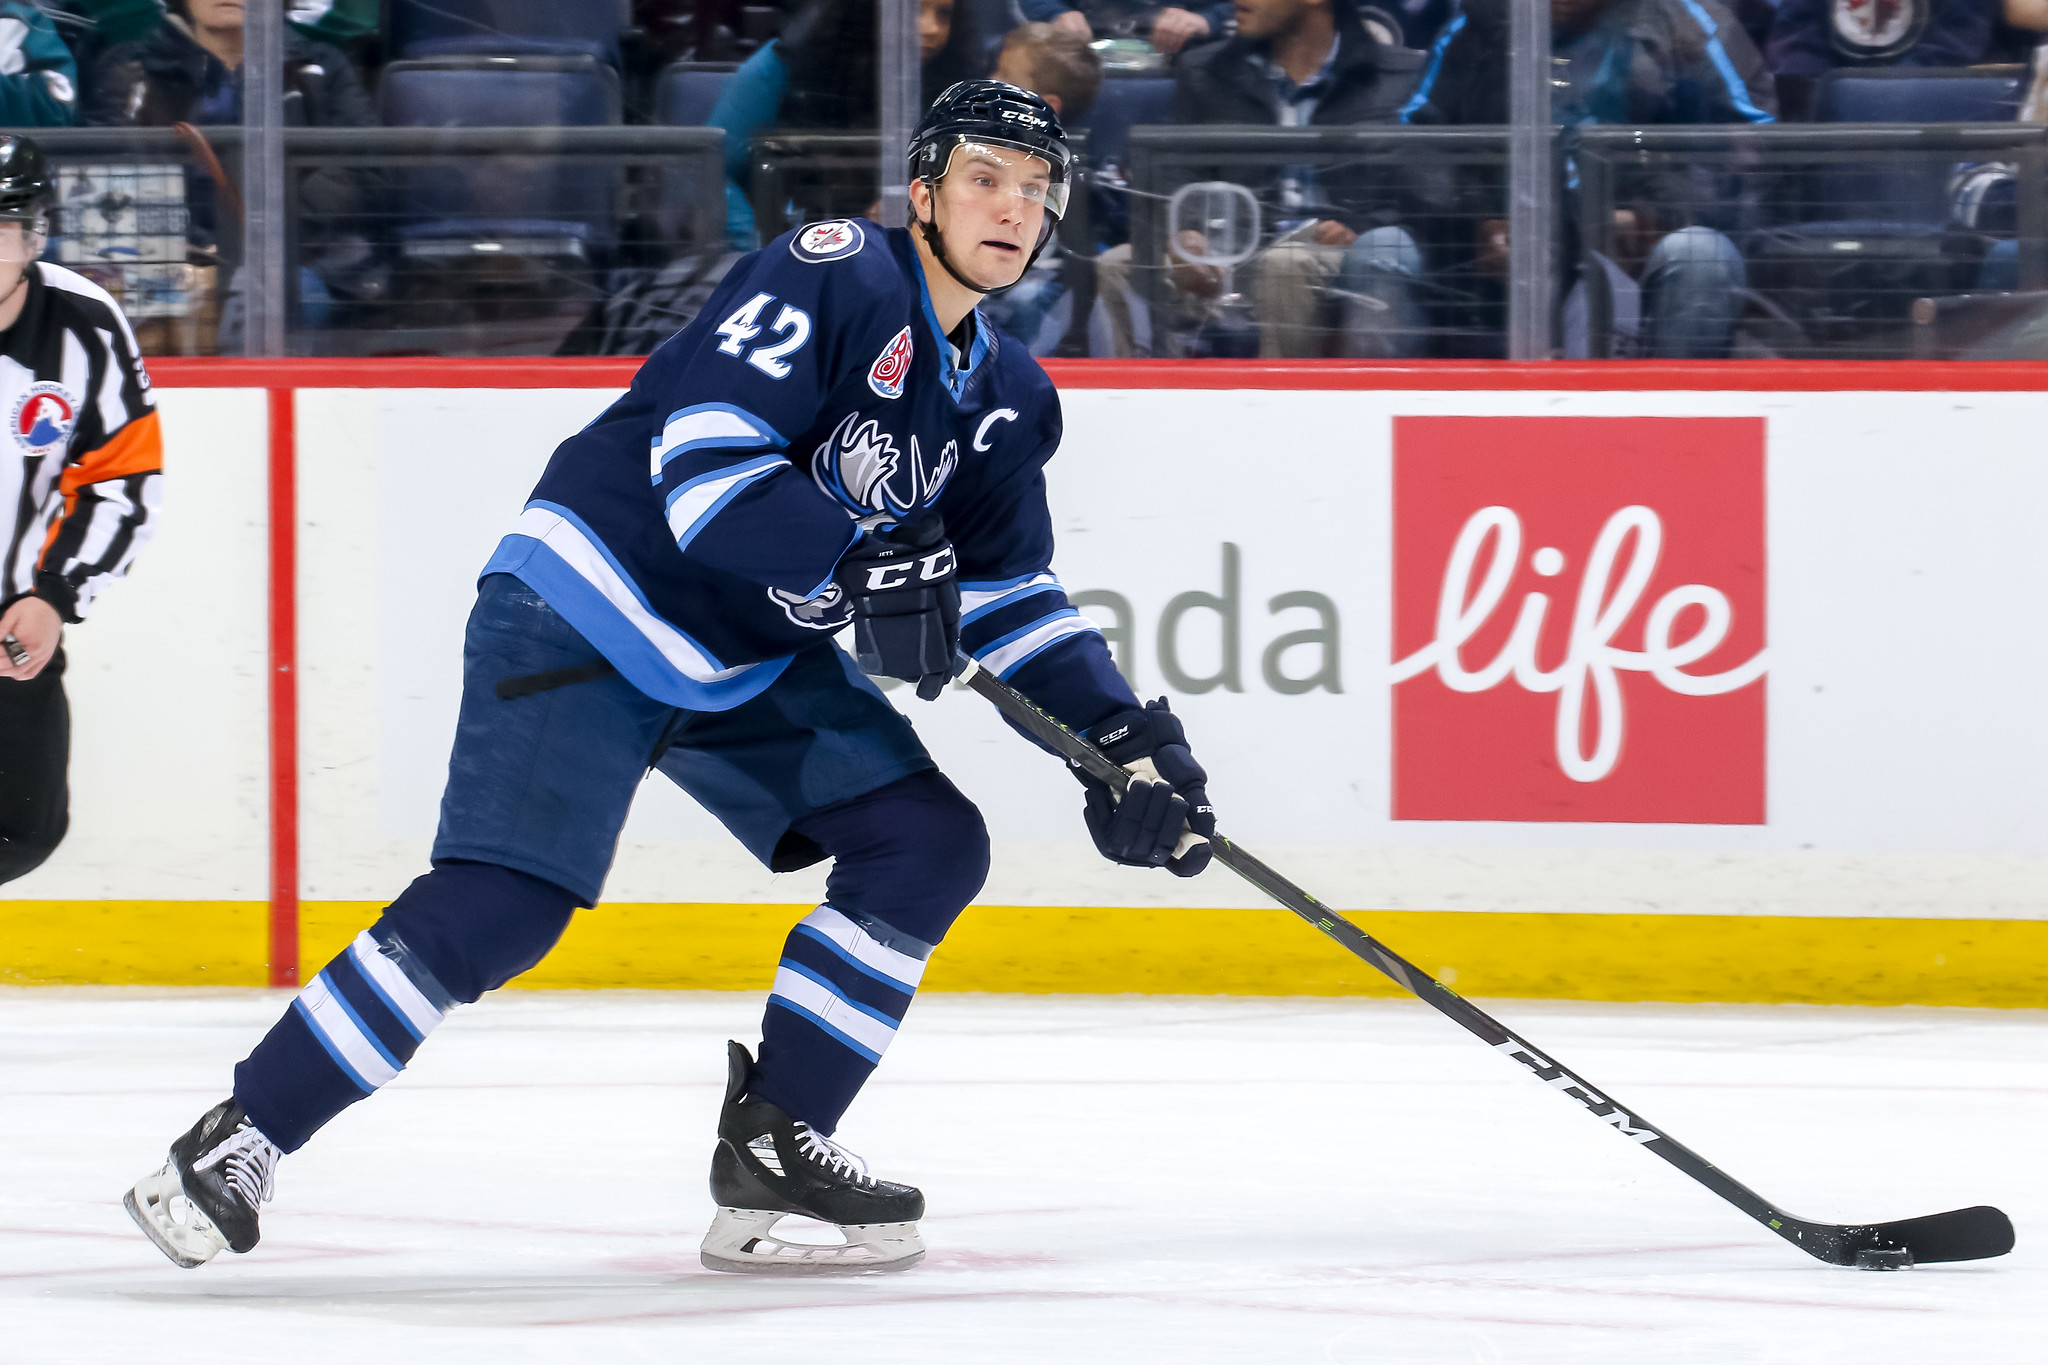 A look at the Manitoba Moose roster to start the 2019-20 season ...